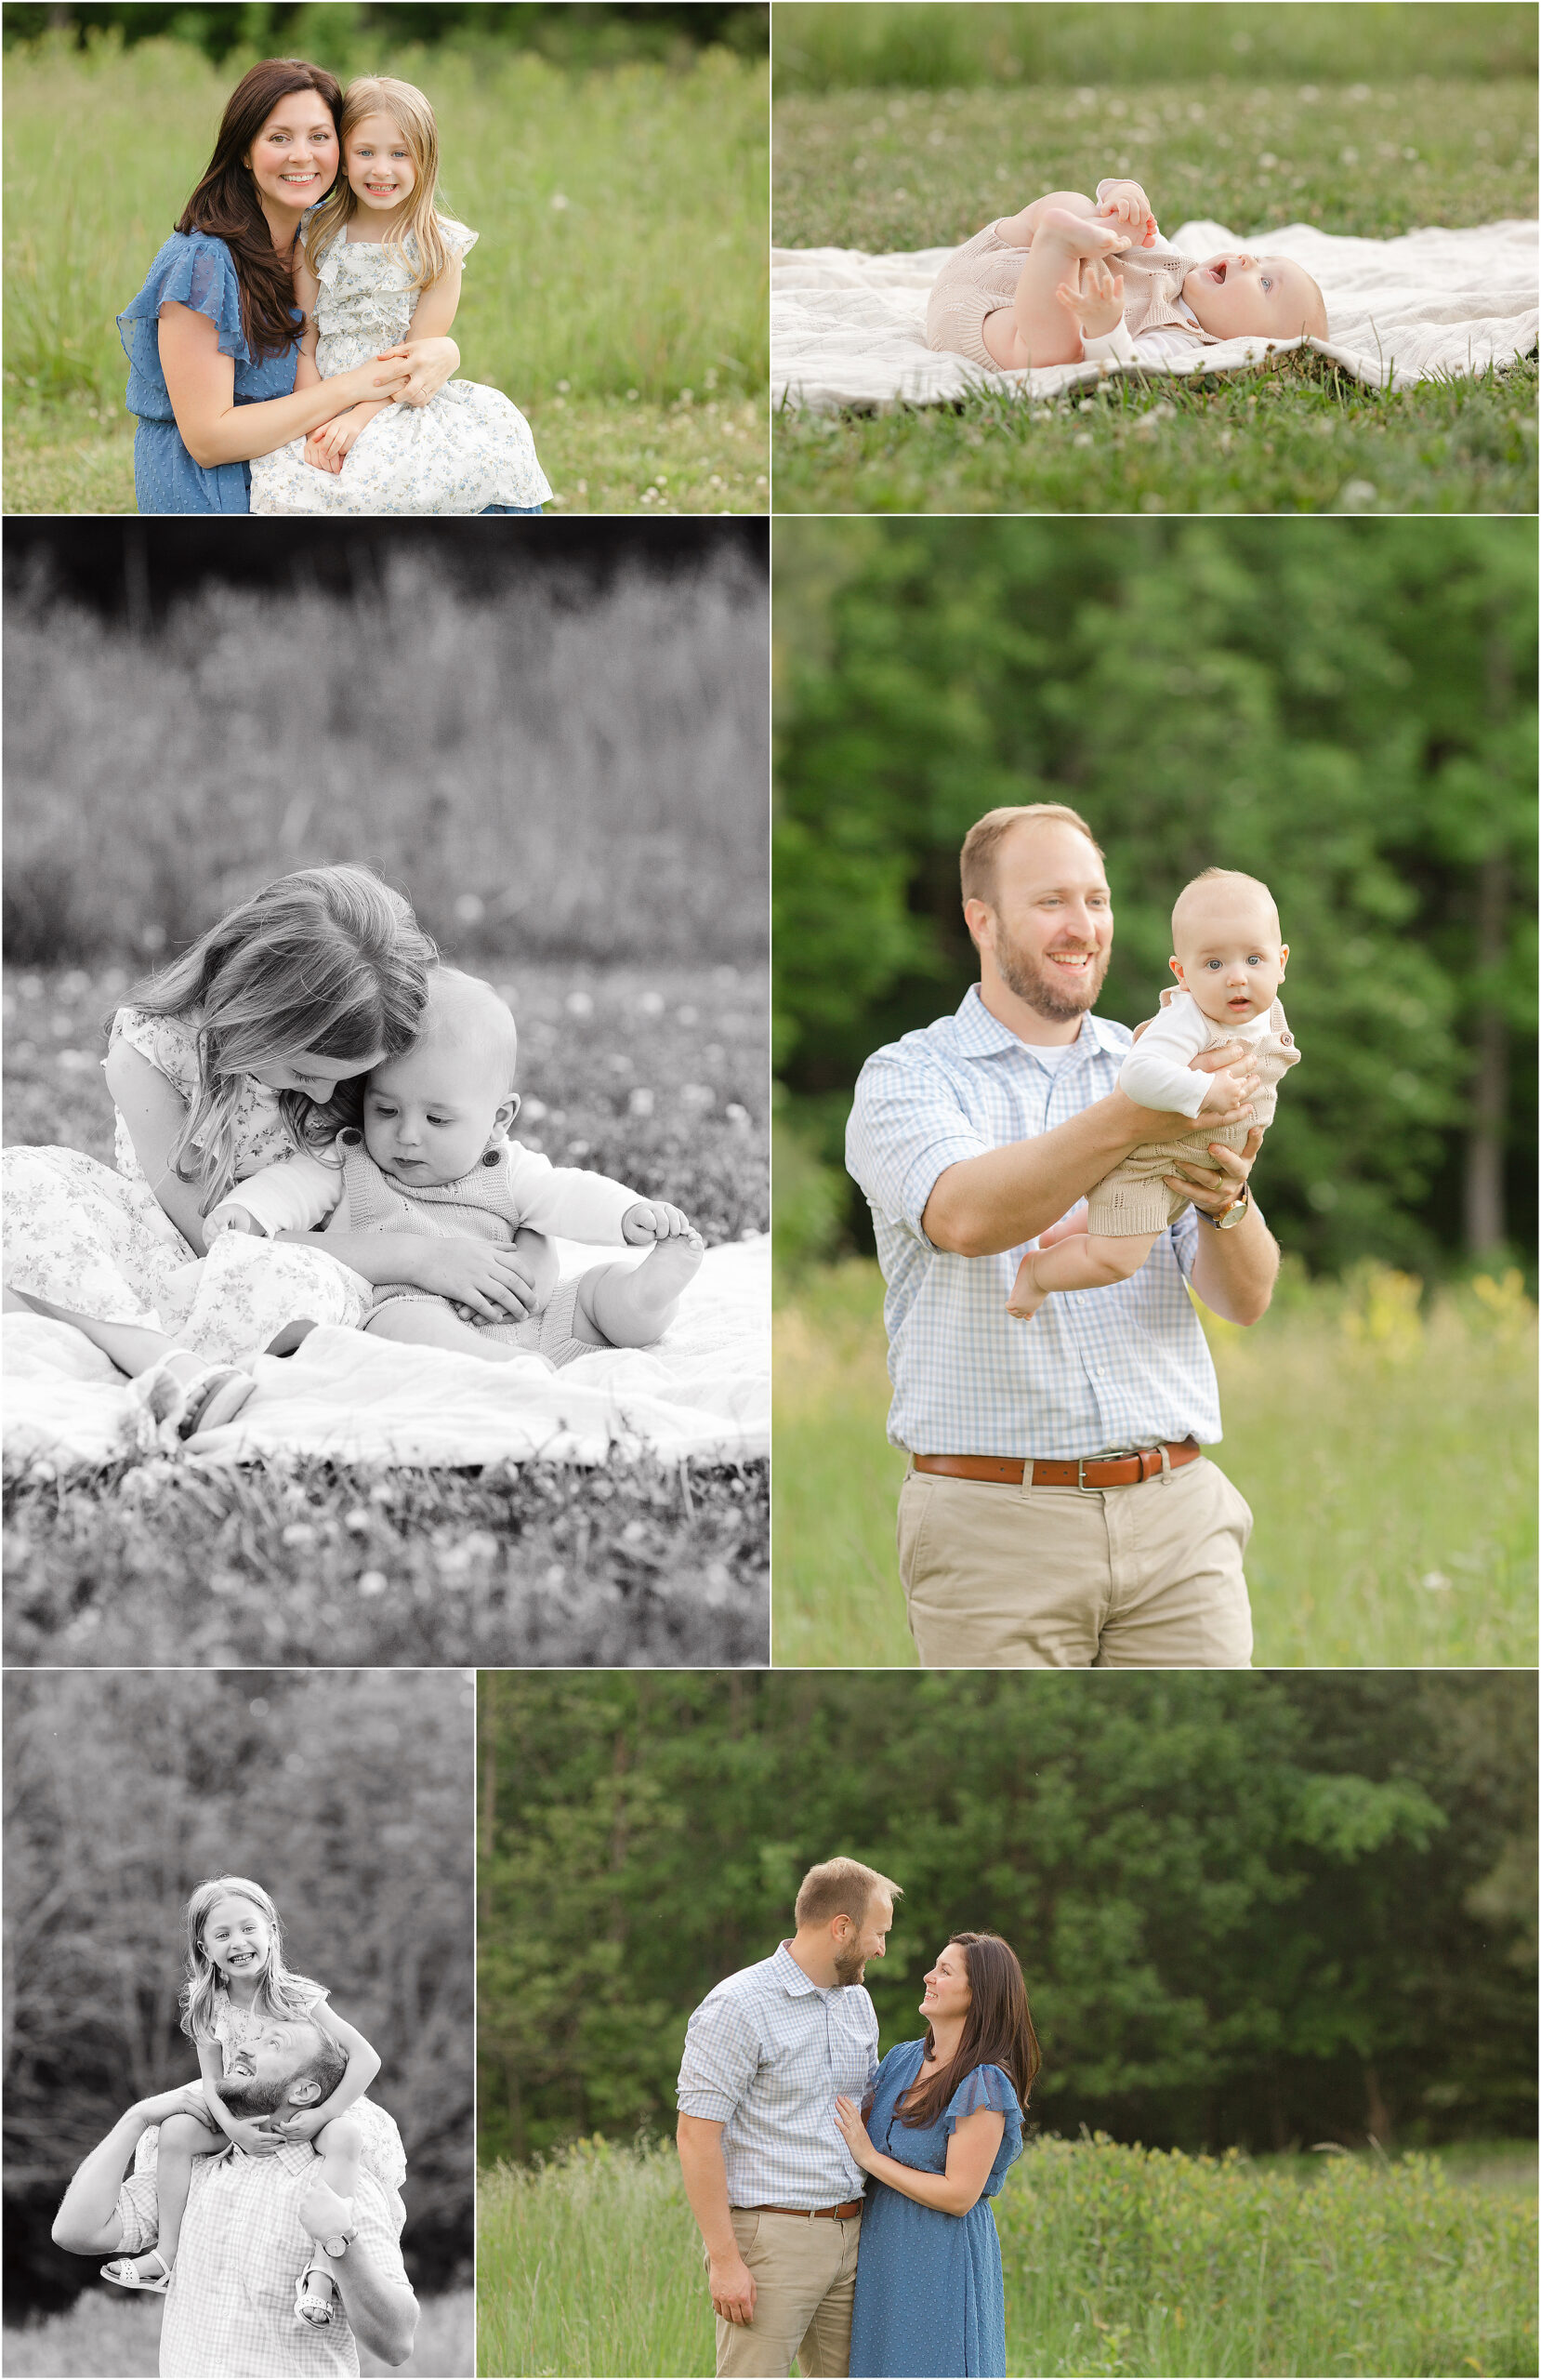 Set of photos depicting a happy family playing outside together, photographed by Christy Johnson Photography